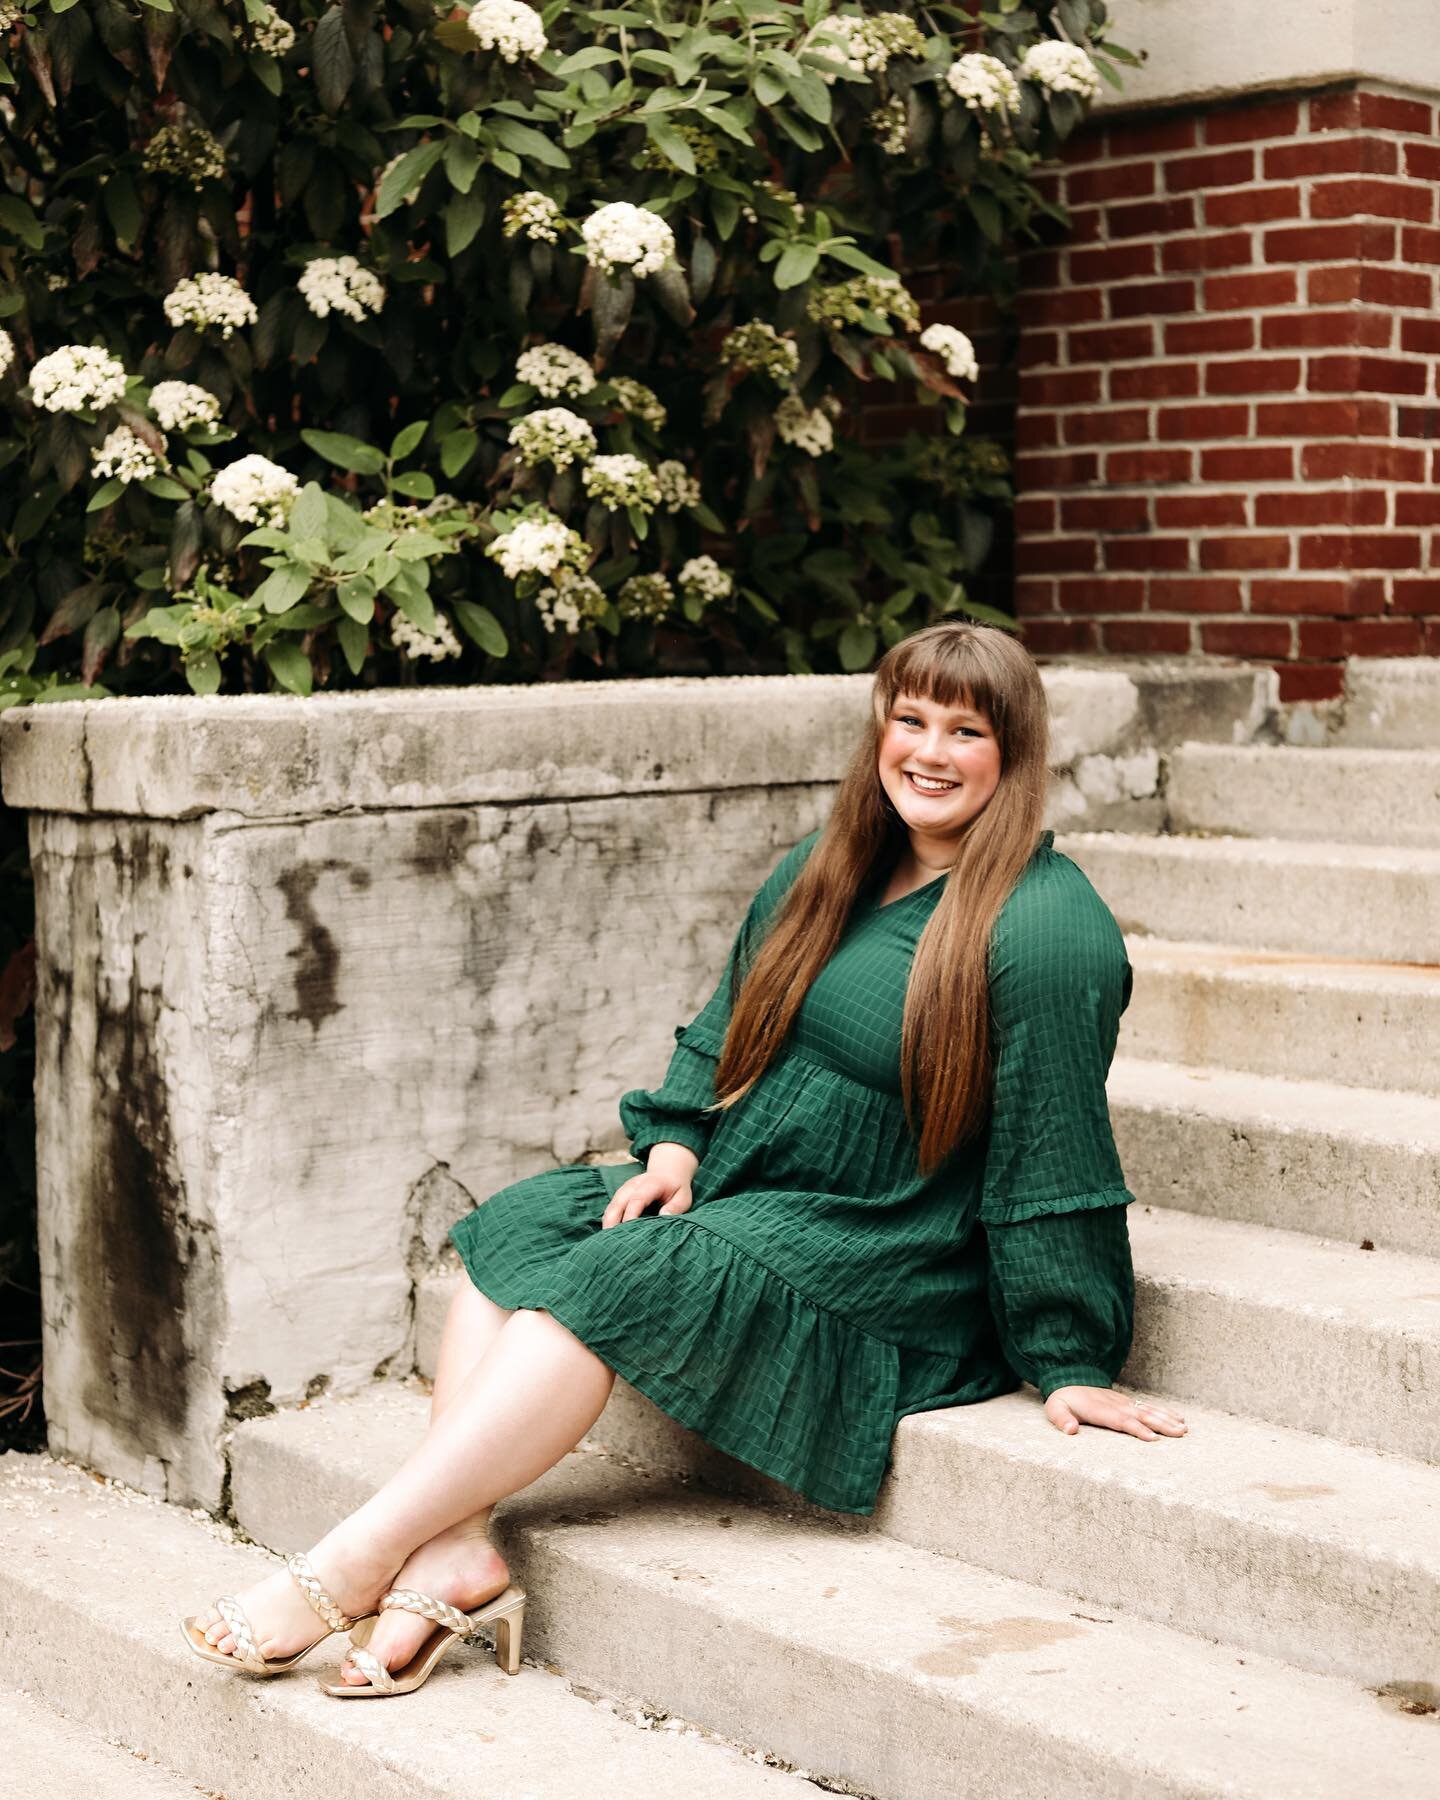 Warm weather and beautiful flowers make for a PERFECT time to shoot!! I am obsessed with this shot, and all props to this gorgeous senior!!🤍📸
&bull;
&bull;
&bull;
#graduationportraits #cmueagles #classof2022 #centralmethodistuniversity #canonphotog